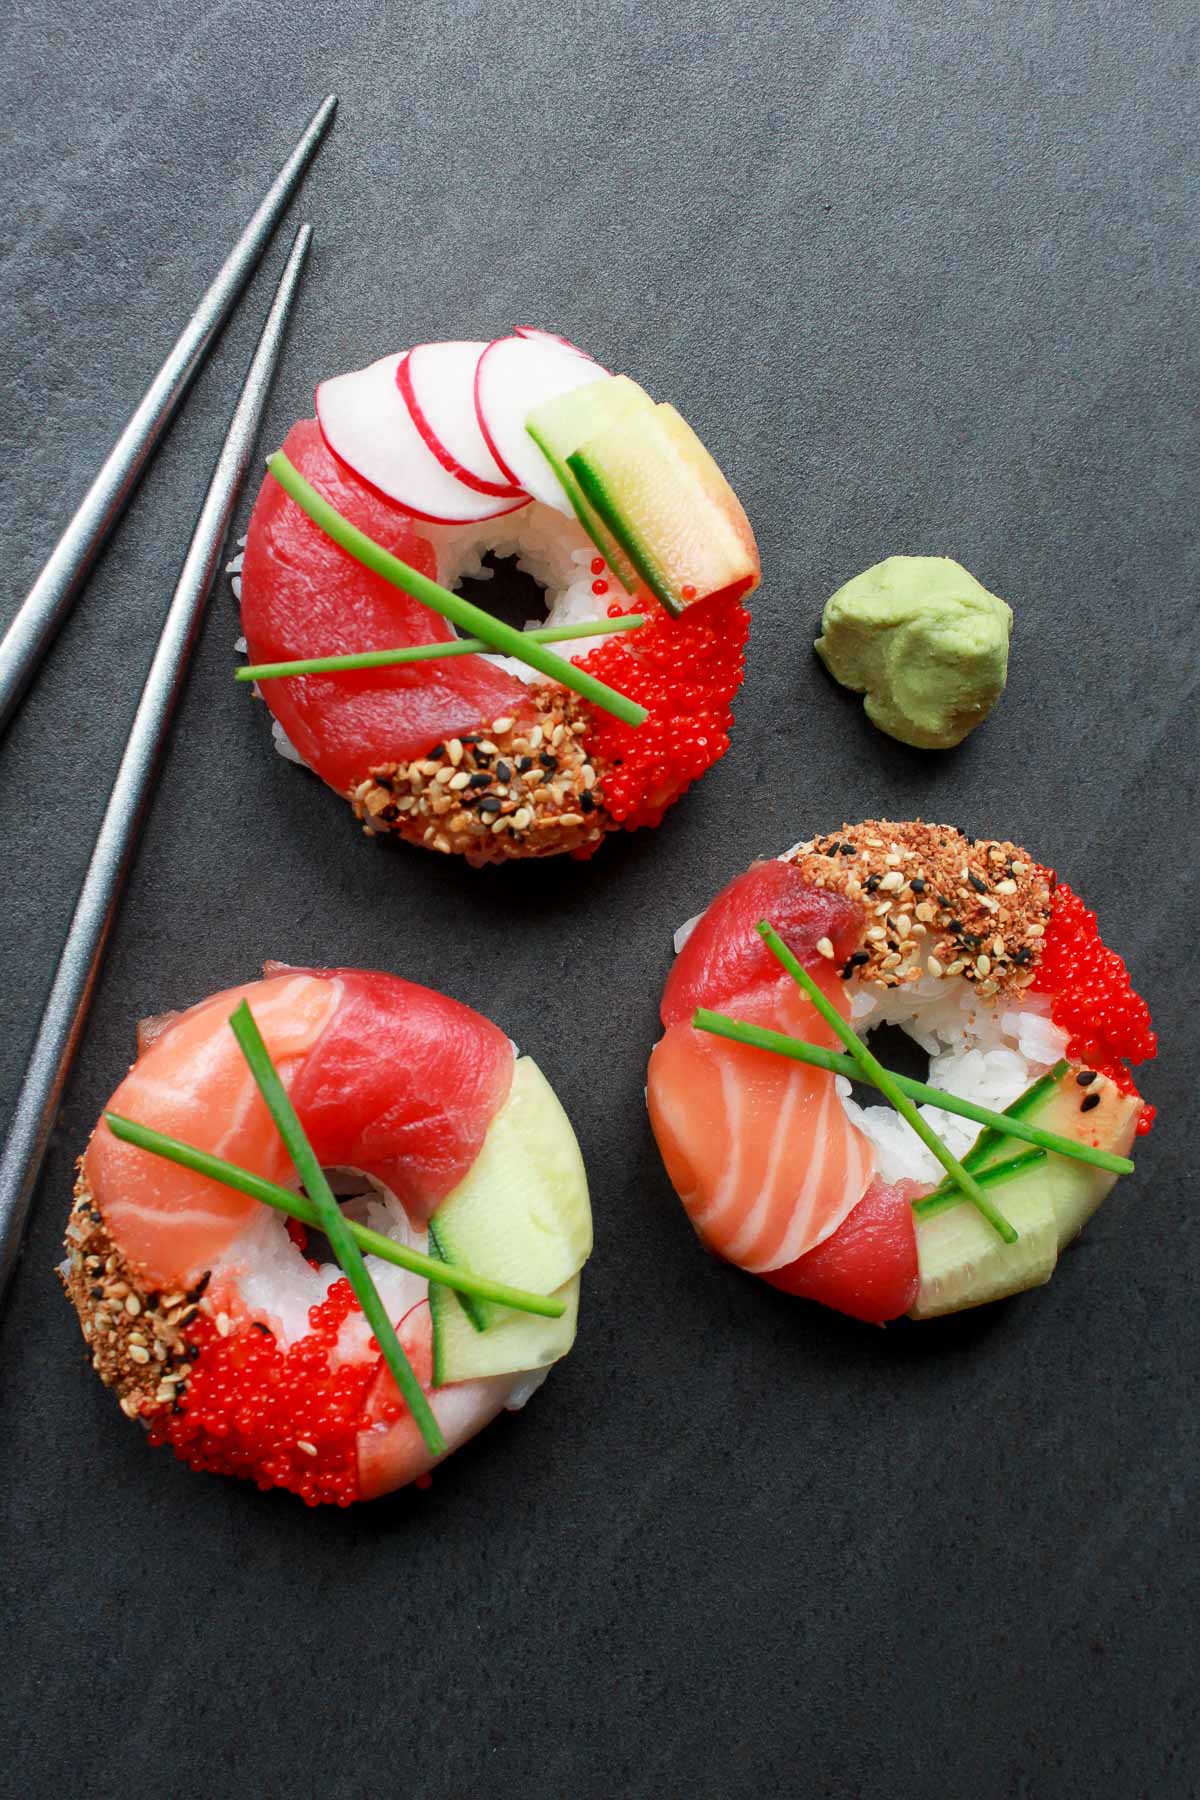 Three sushi donuts on a black surface with silver chopsticks and wasabi paste on the side.